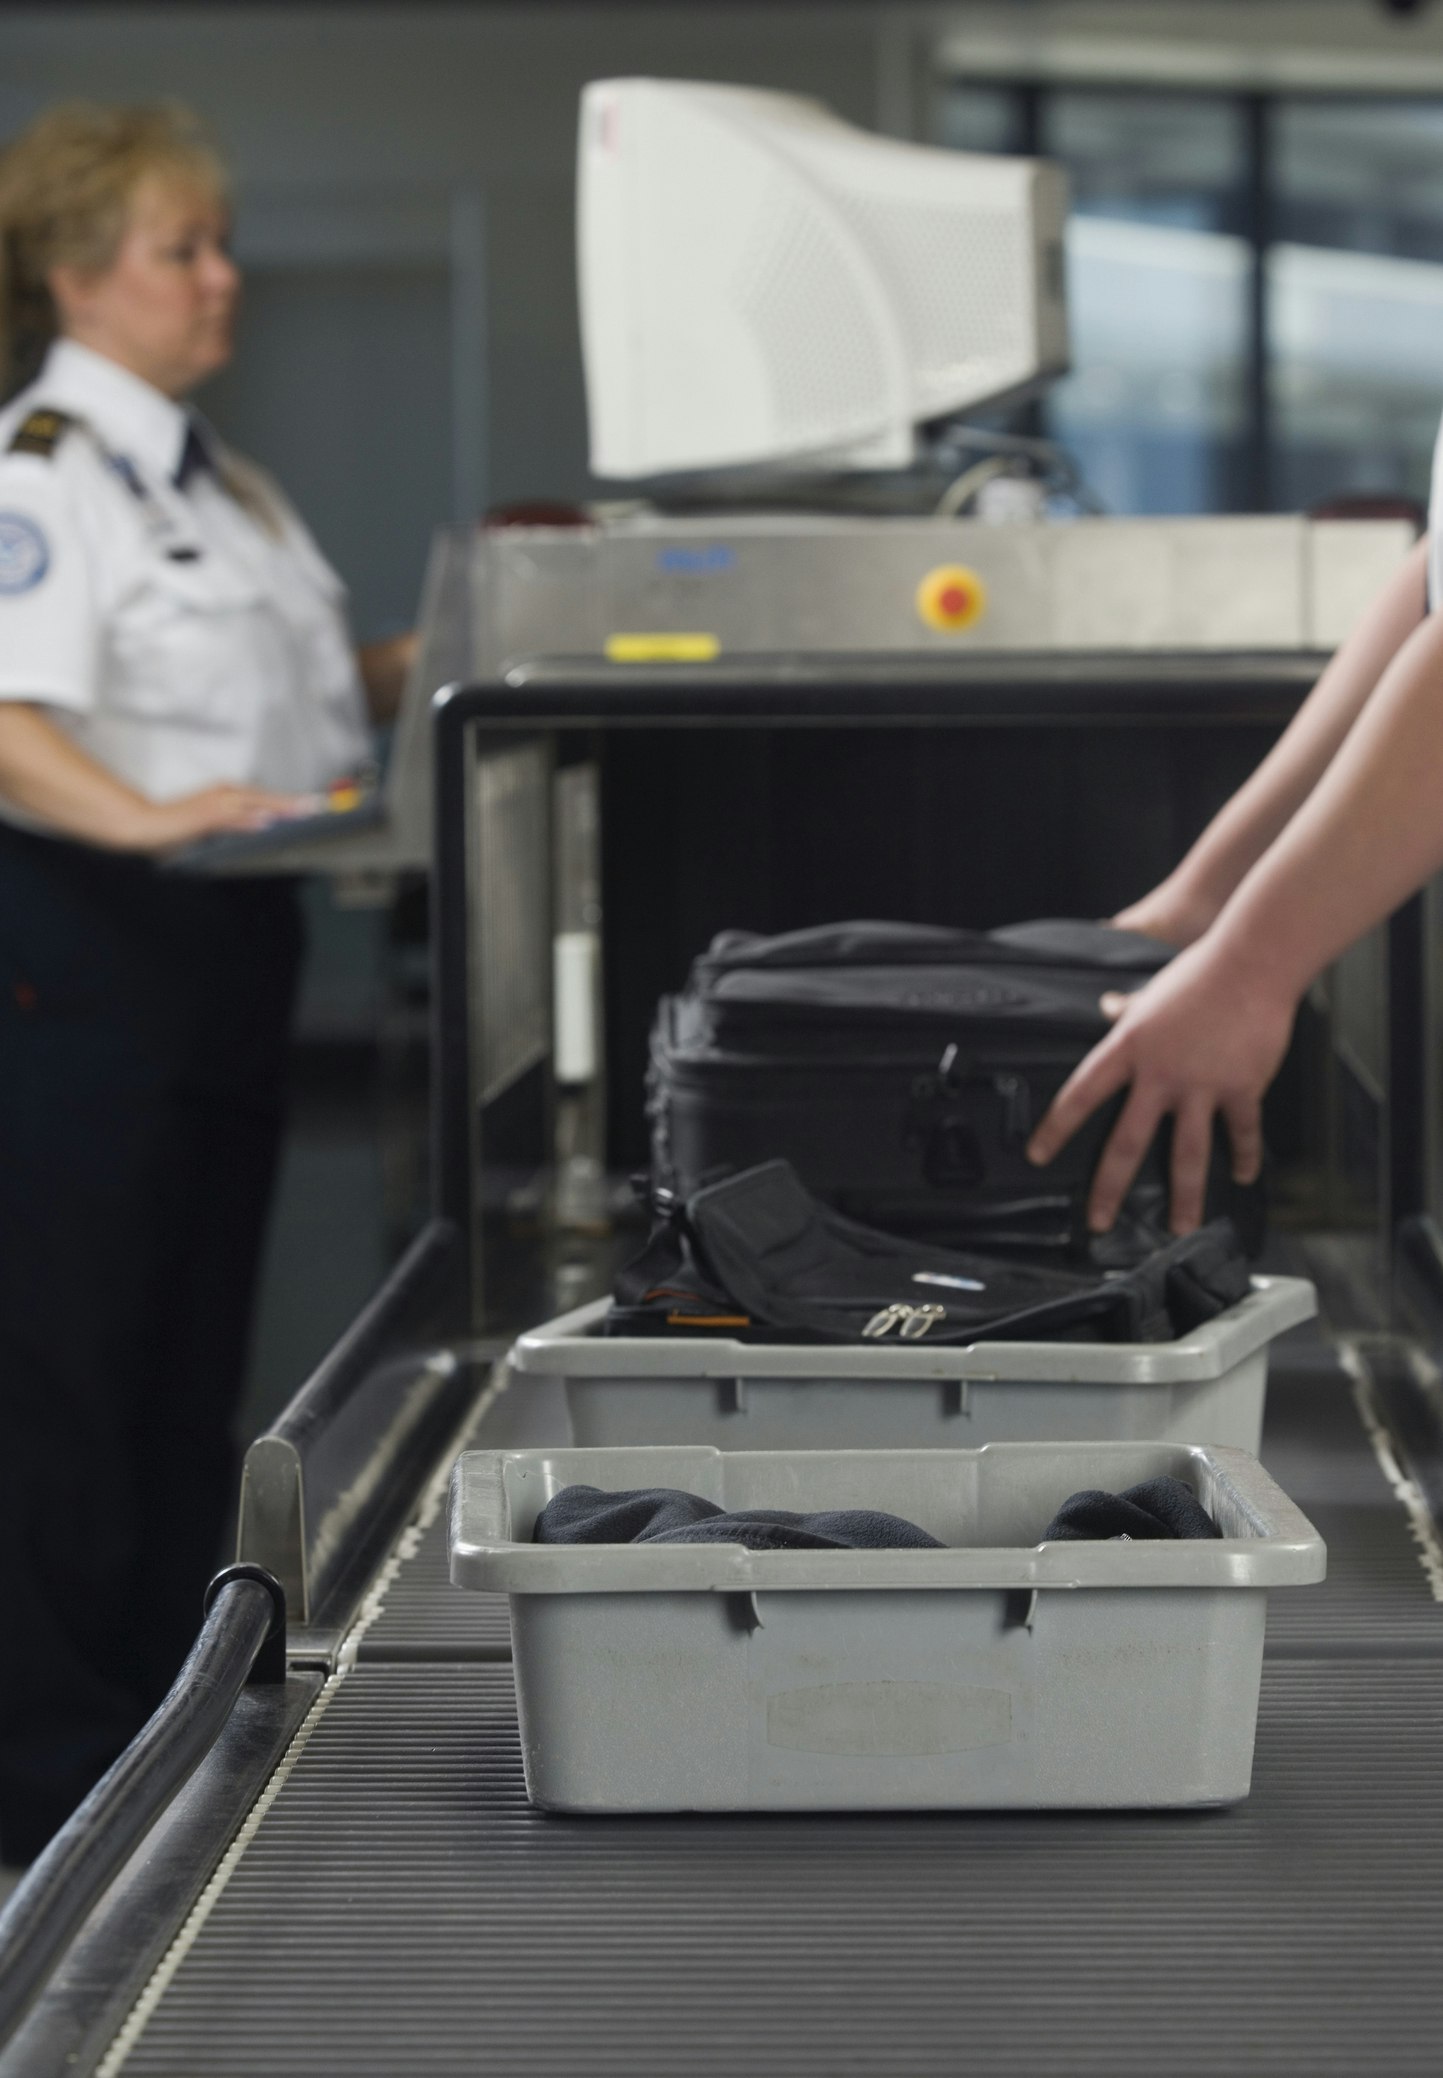 An airport security worker checking baggage